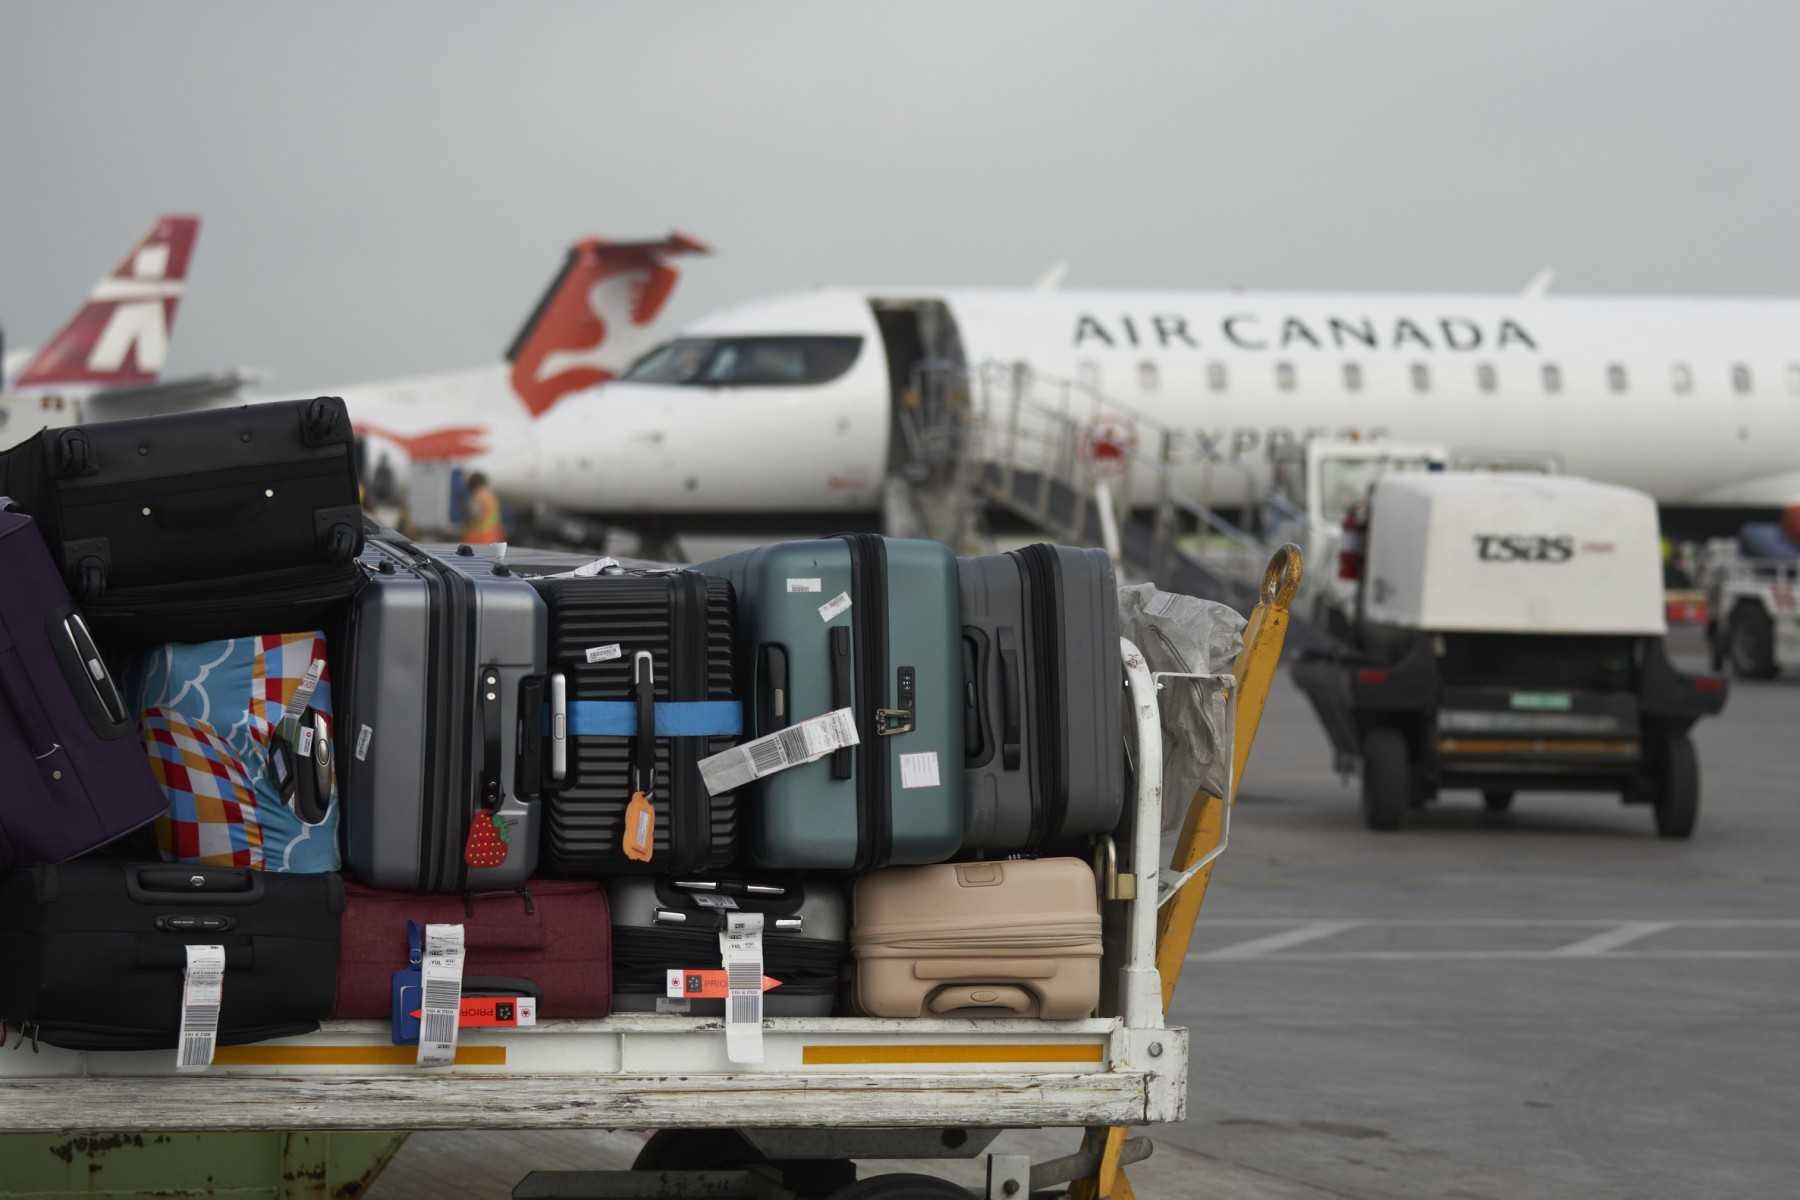 Baggage sits on a cart on the tarmac at Pierre Elliott Trudeau International Airport in Montreal, Quebec, on May 16. Photo: AFP